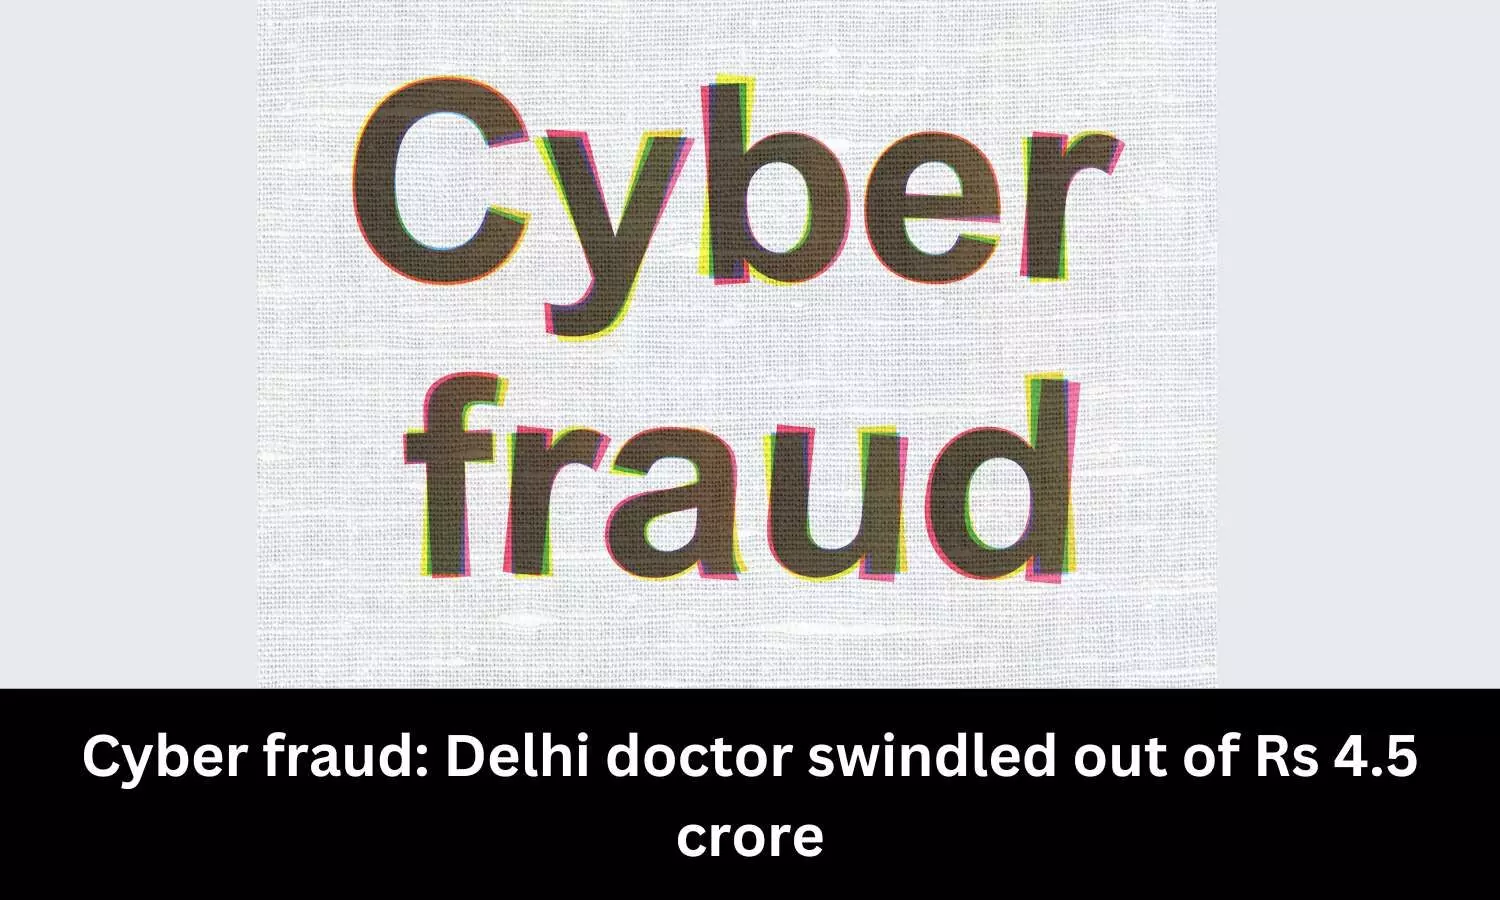 34-year-old doctor duped of Rs 4.5 crore by cyber fraudsters